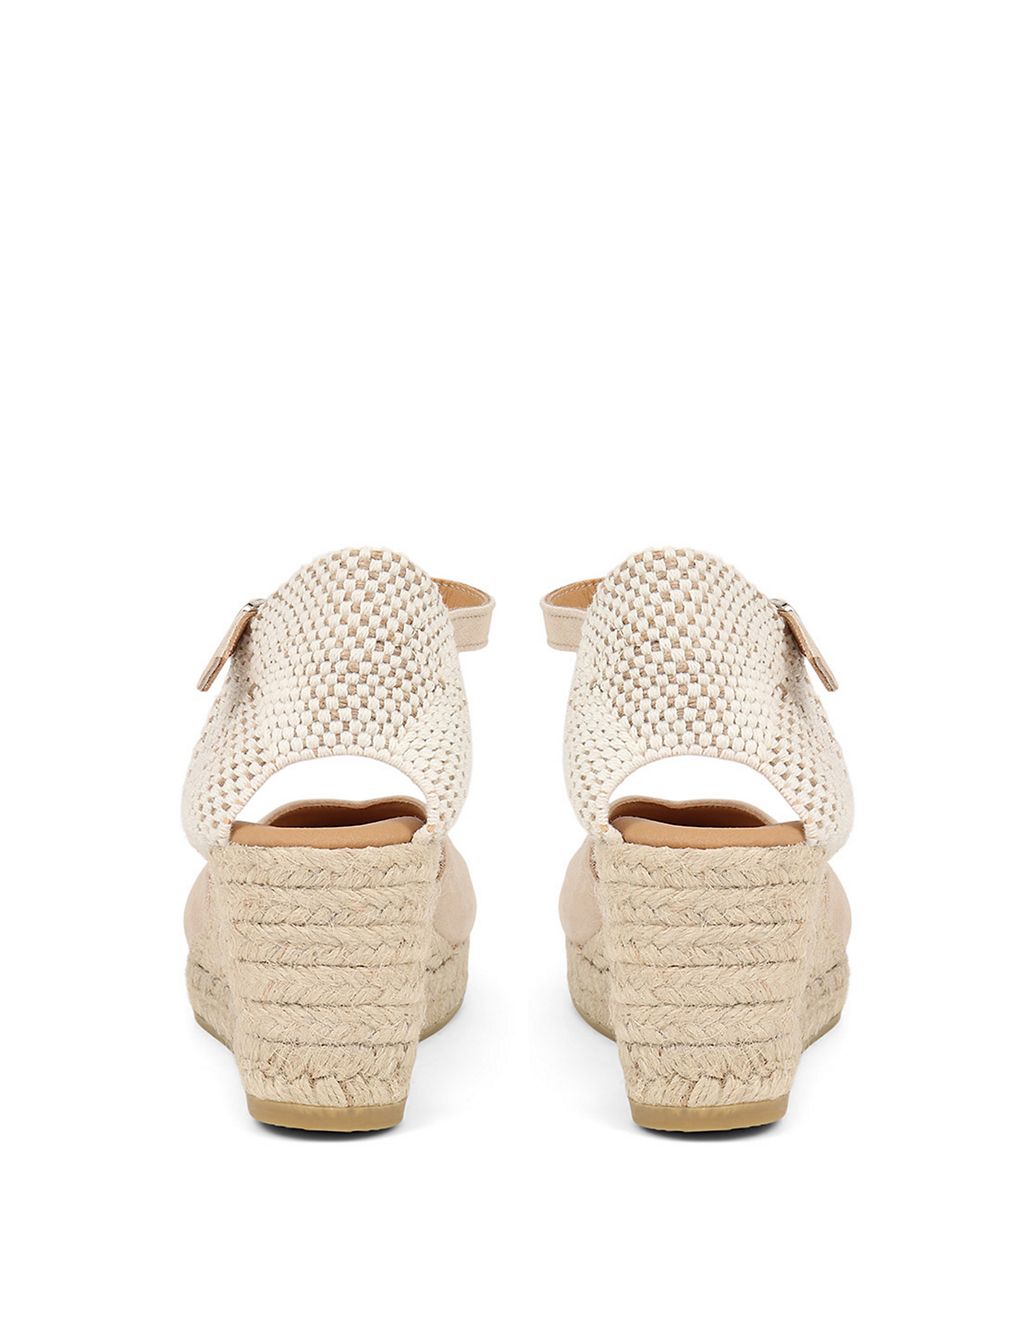 Suede Ankle Strap Wedge Espadrilles 4 of 7